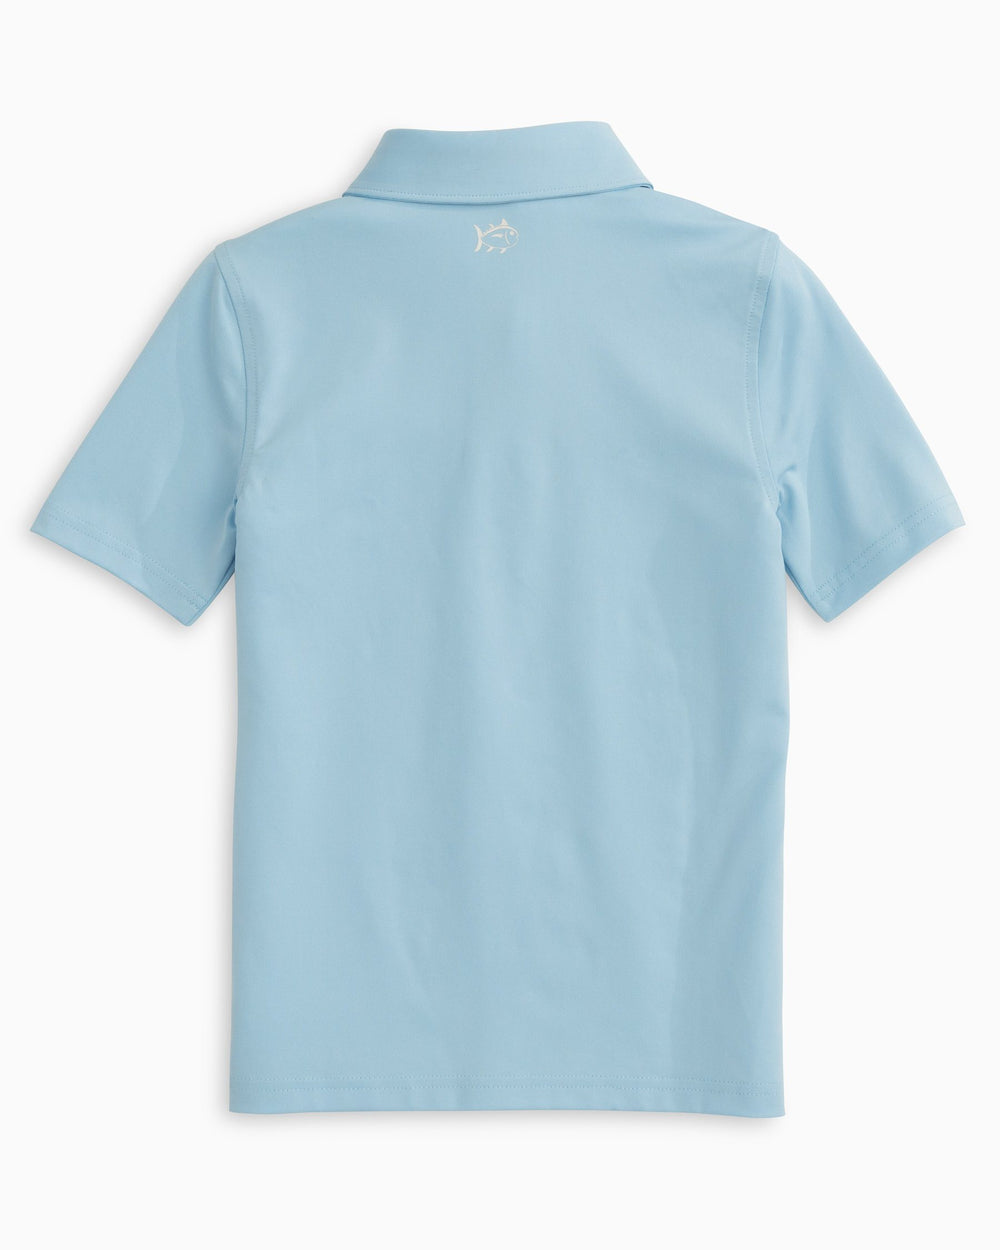 The back view of the Boys Driver Performance Polo Shirt by Southern Tide - Sky Blue